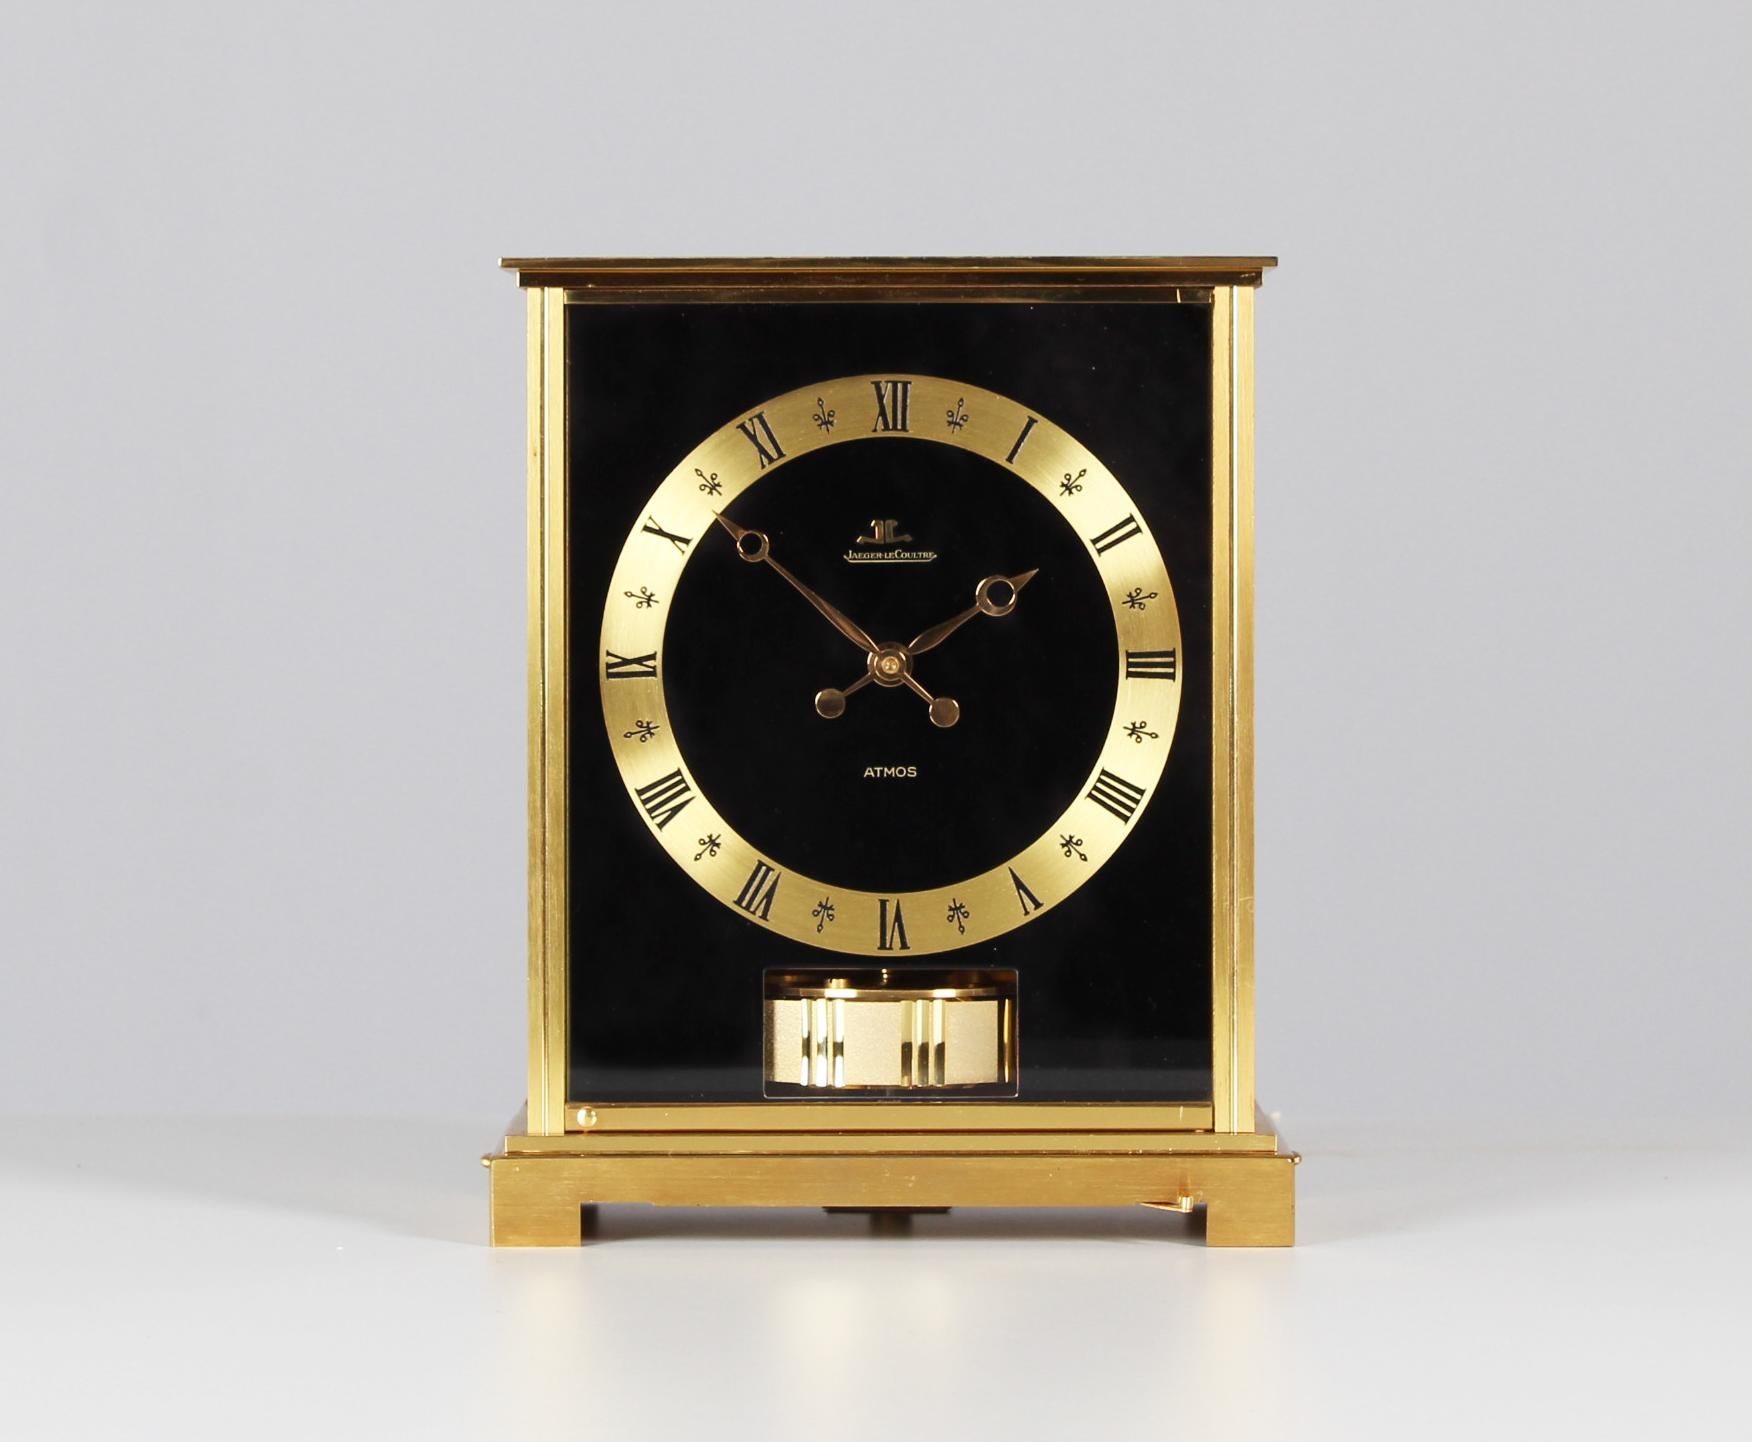 Jaeger LeCoultre - ATMOS VII black lacquered

Switzerland
brass gold plated
Year of manufacture 1970

Dimensions: H x W x D: 22 x 17 x 11 cm

Description:
Rare Atmos VII Embassy in gold plated brass case with black painted front and